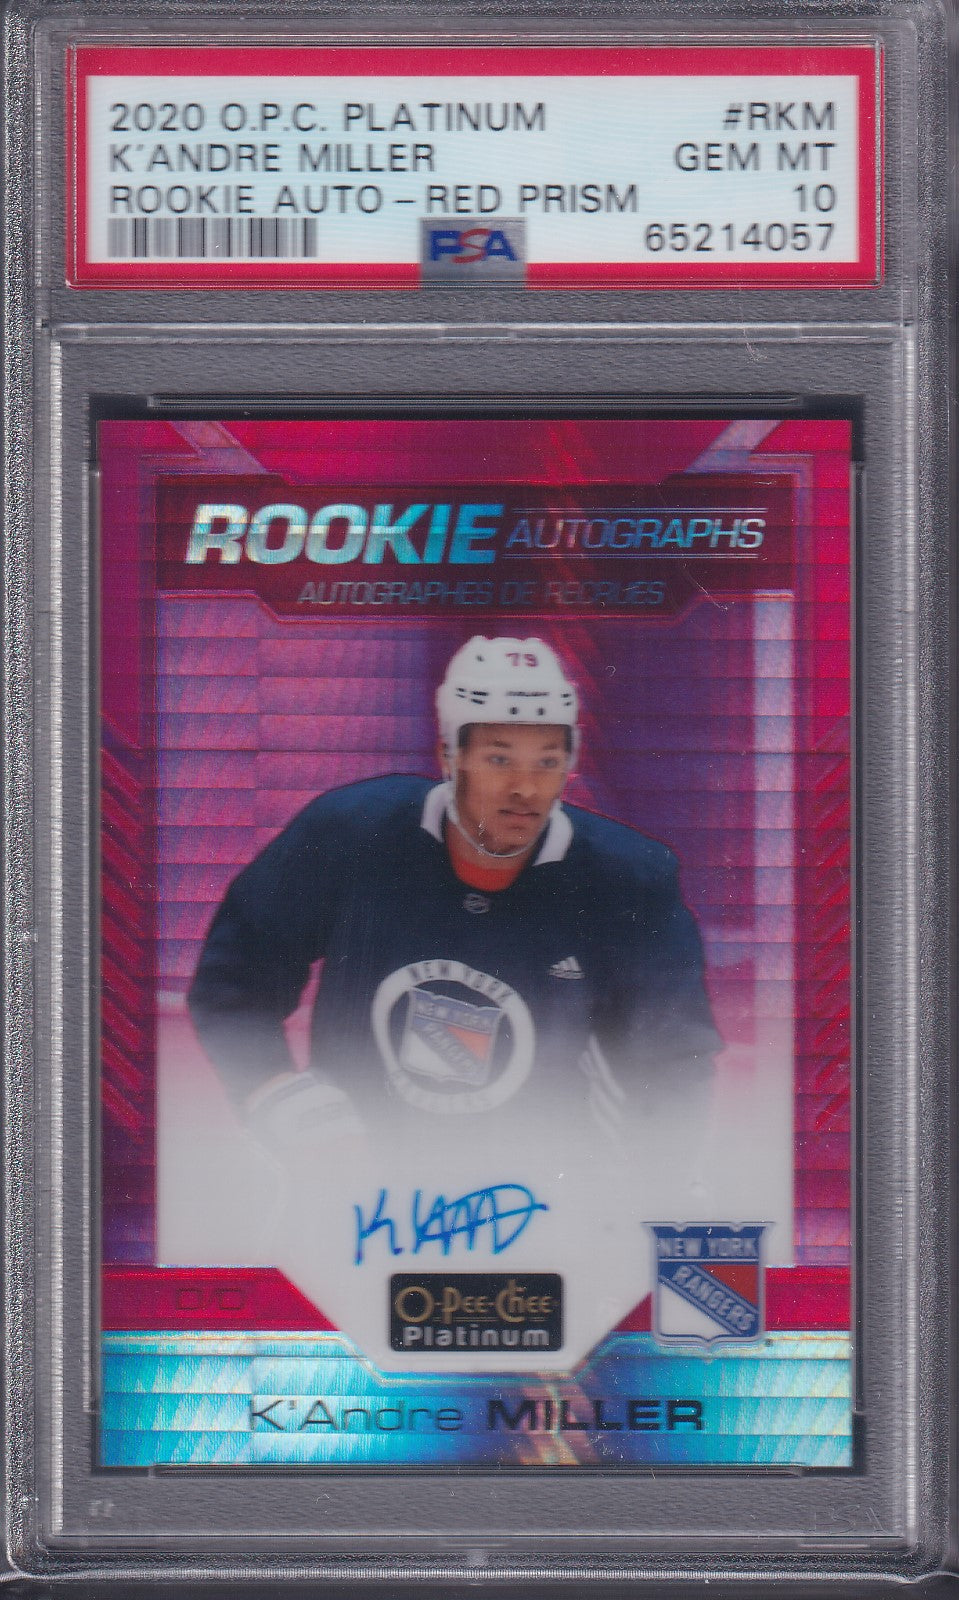 K'ANDRE MILLER - 2020 O-Pee-Chee Platinum Rookie Auto RED PRISM, PSA 10, /50